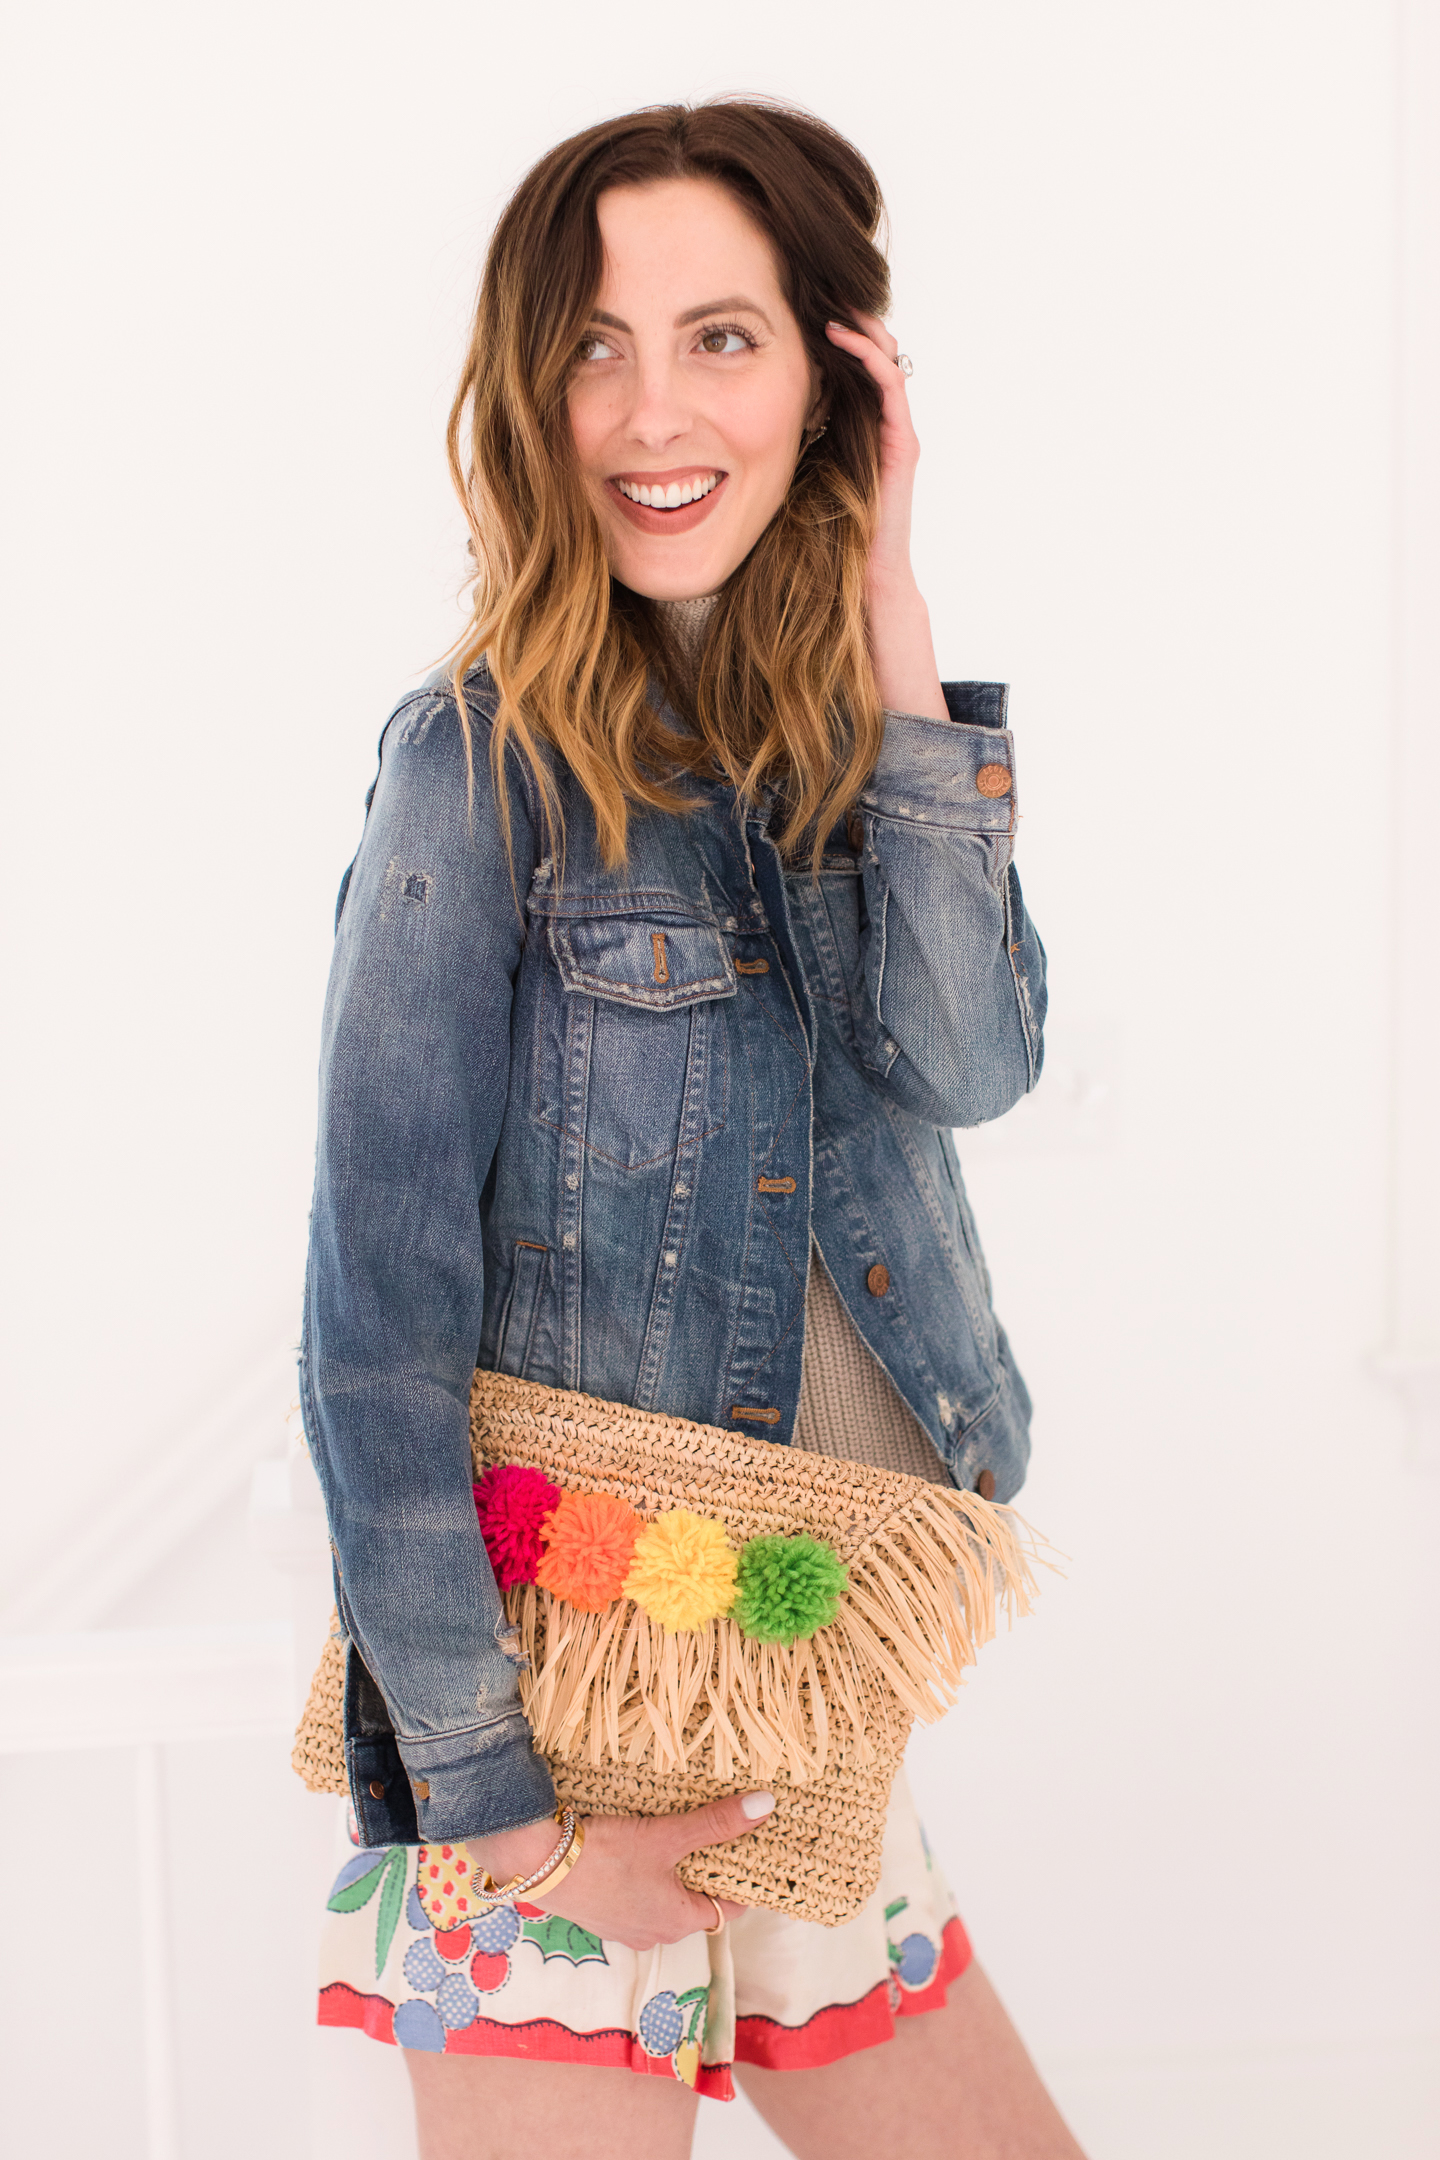 Eva Amurri Martino carries her multicolored DIY pom pom clutch with her colorful summer outfit